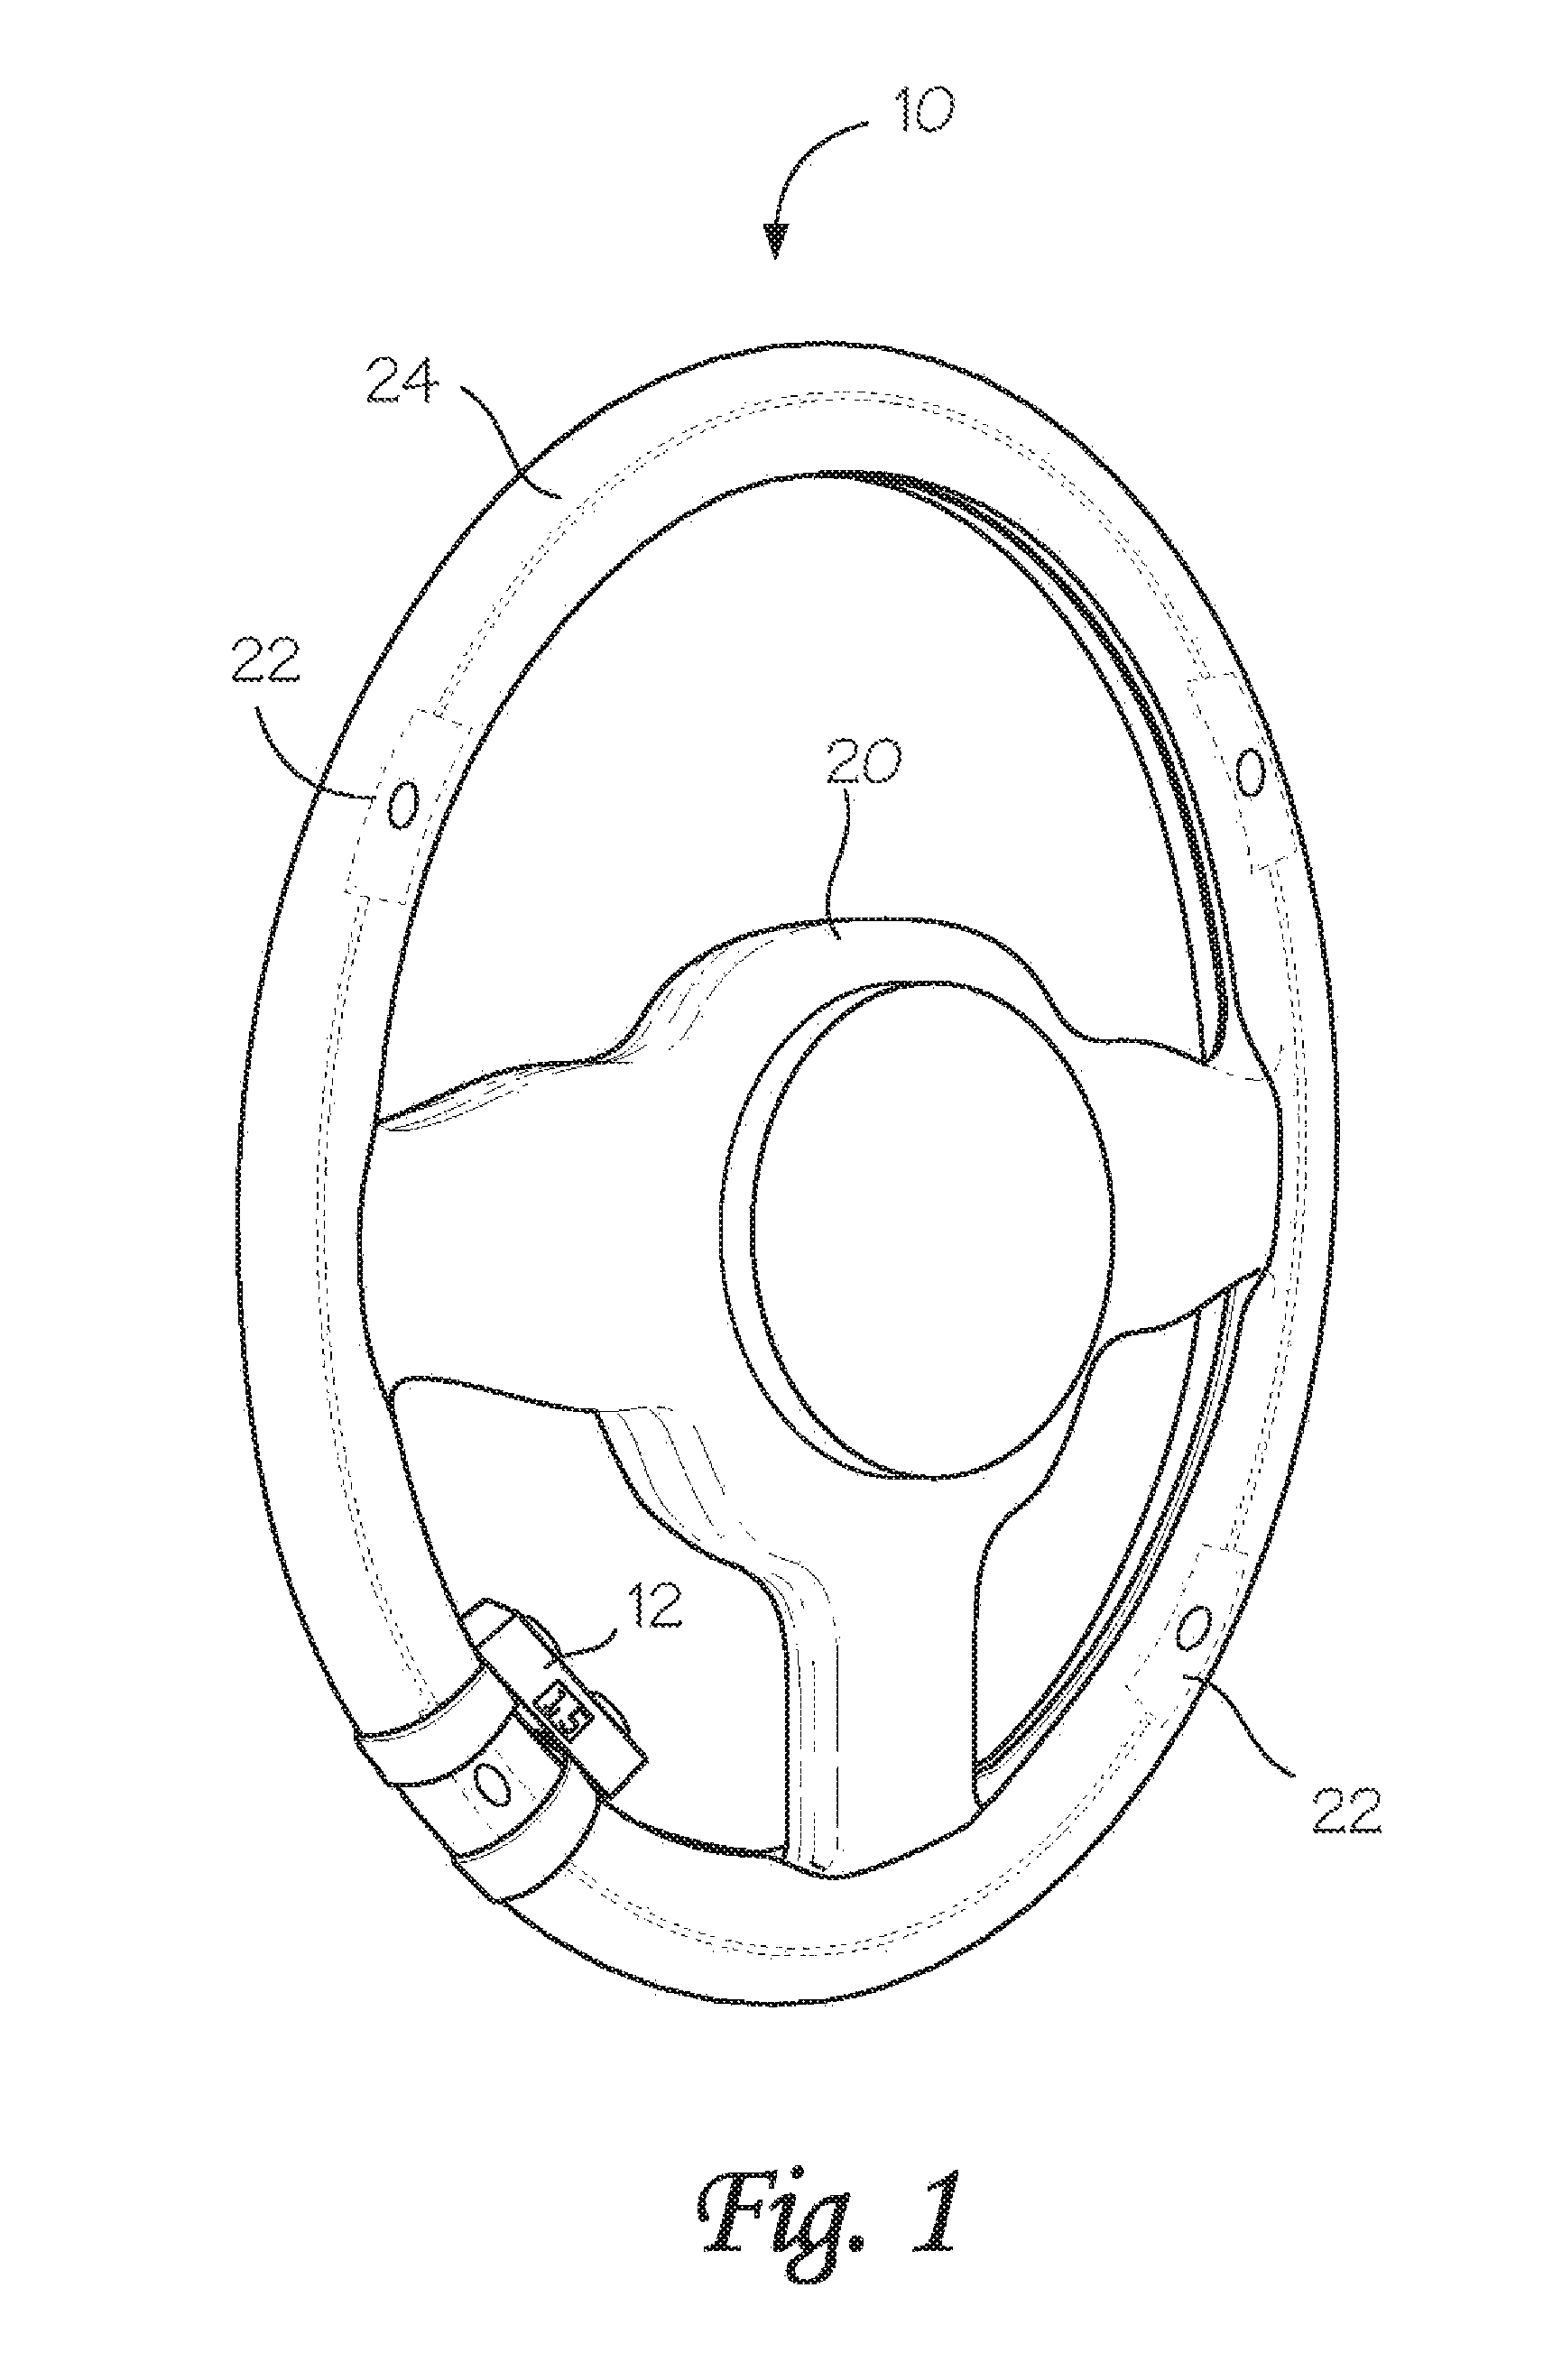 Safety Alarm steering wheel sensor and timer device for drivers